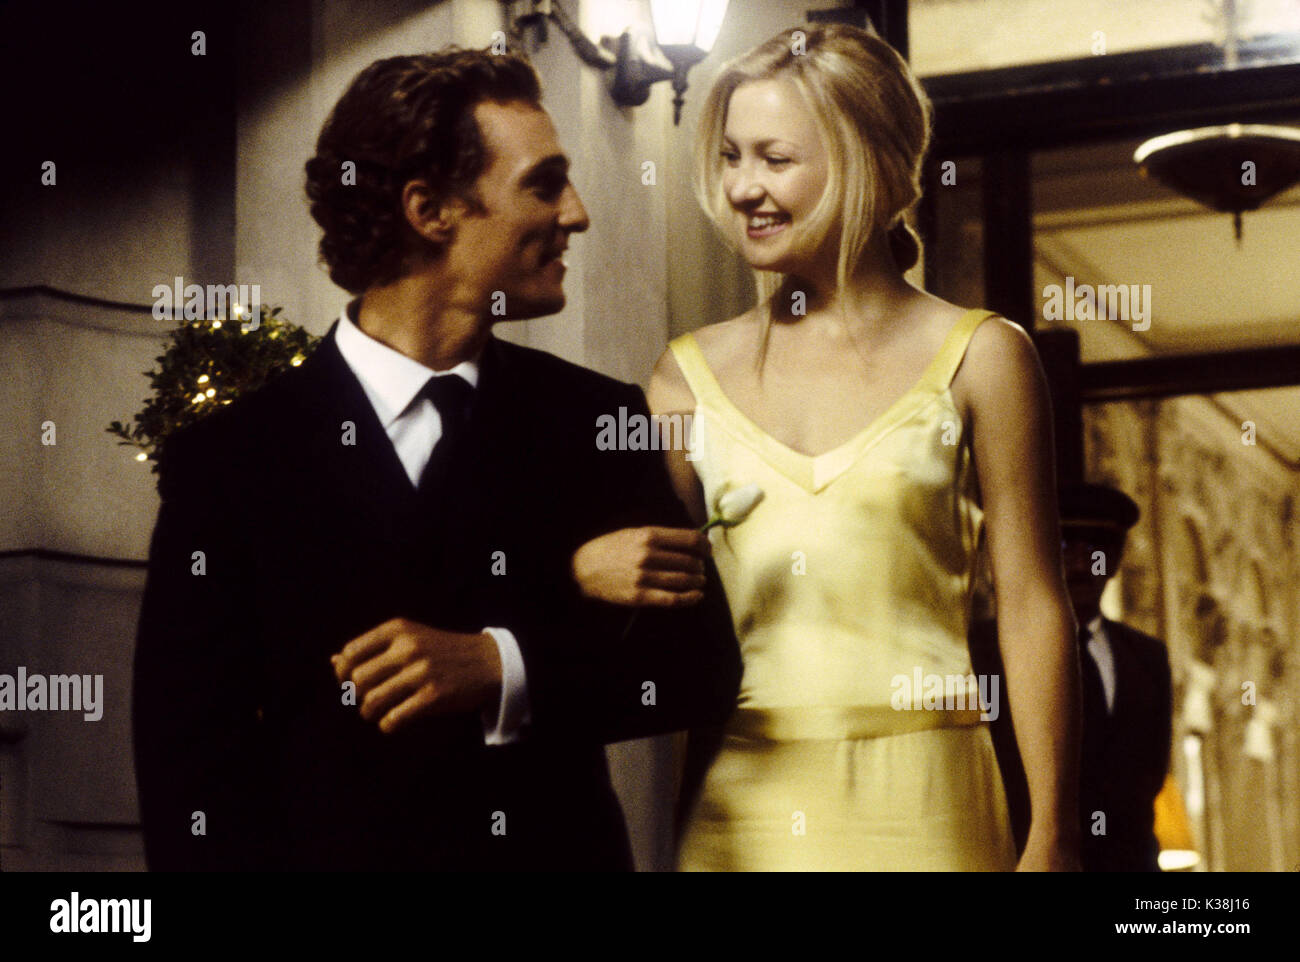 HOW TO LOSE A GUY IN 10 DAYS MATTHEW MCCONAUGHEY, KATE HUDSON     Date: 2003 Stock Photo